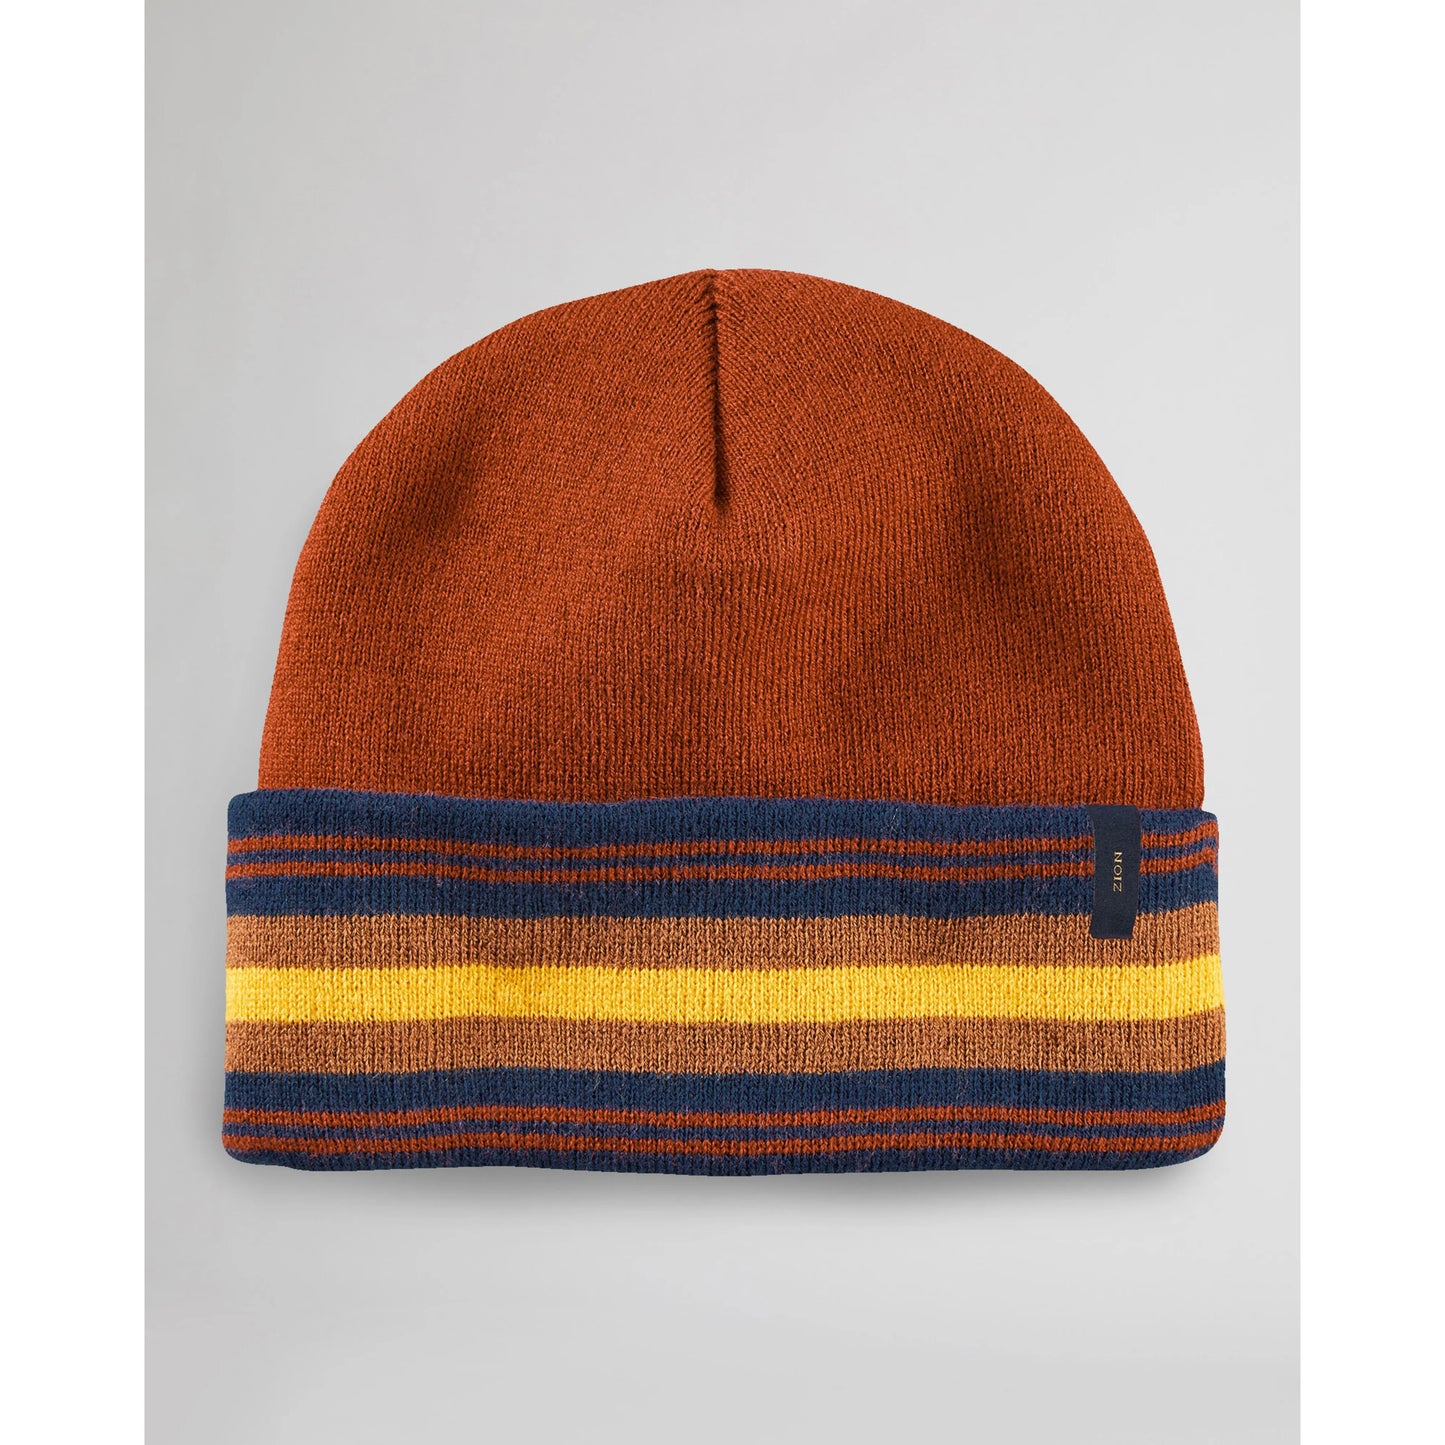 Beanie Hat, soft stretchy ribbed knit, rust with yellow/blue/rust stripes